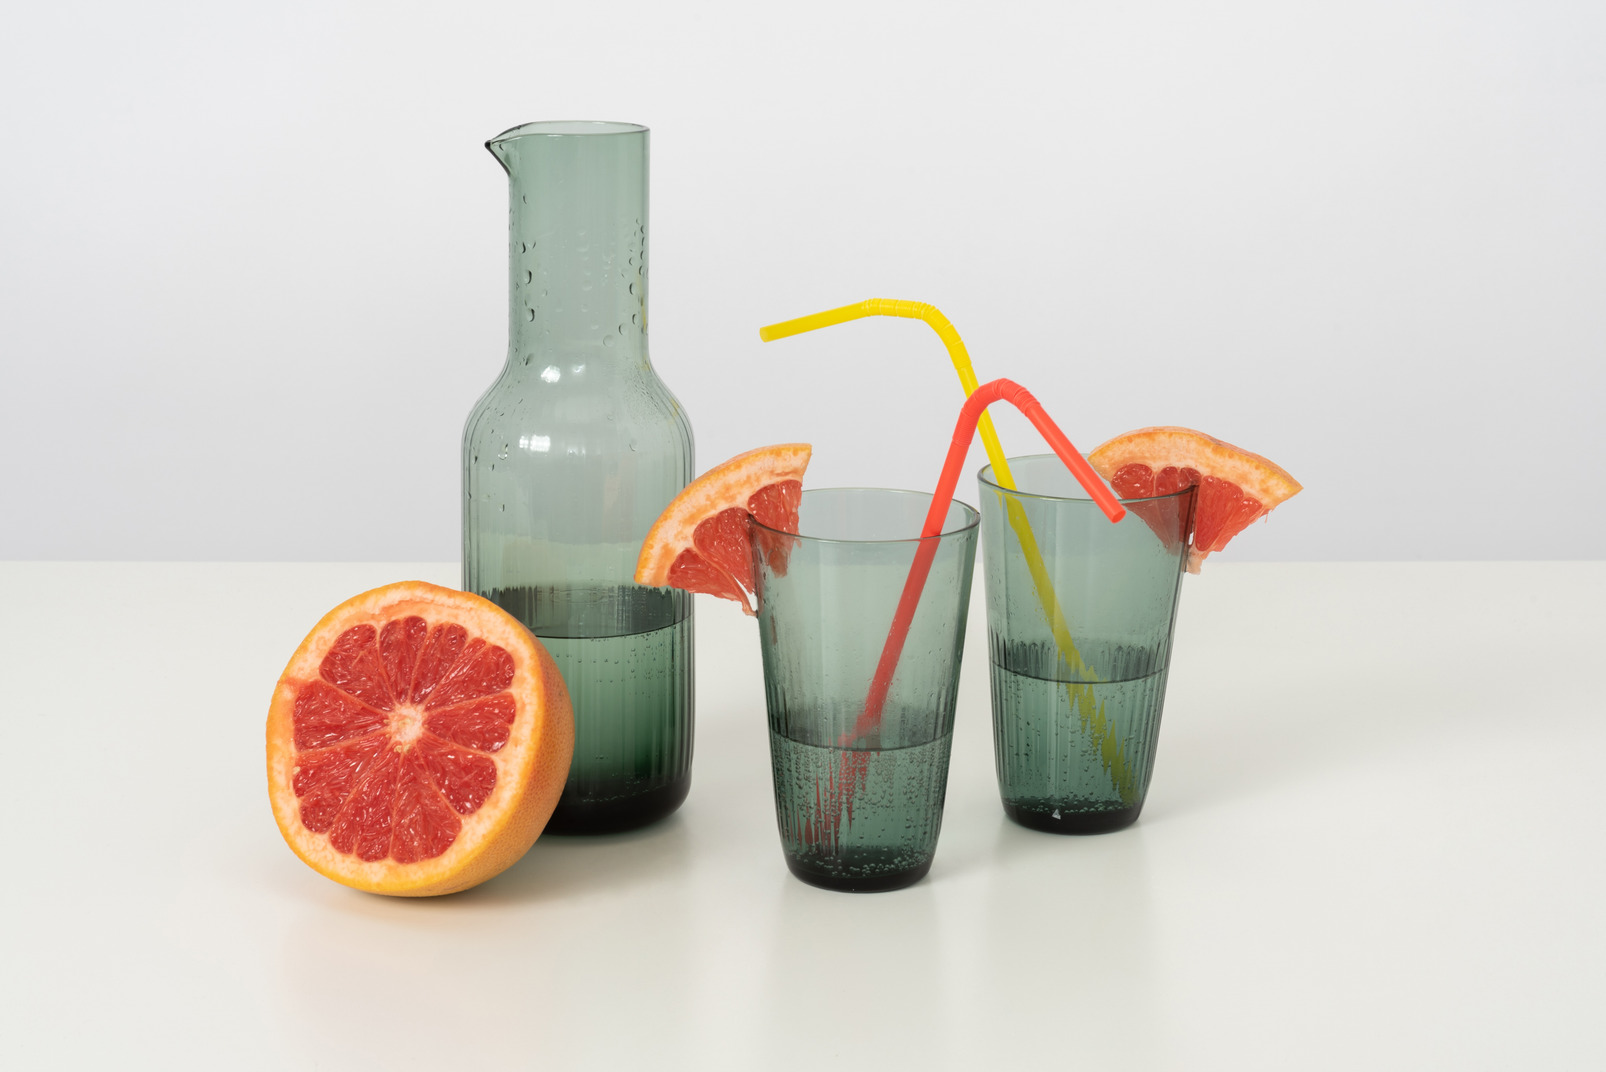 A glass bottle and glasses with some cold water and slices of a grapefruit, along with some colourful plastic straws